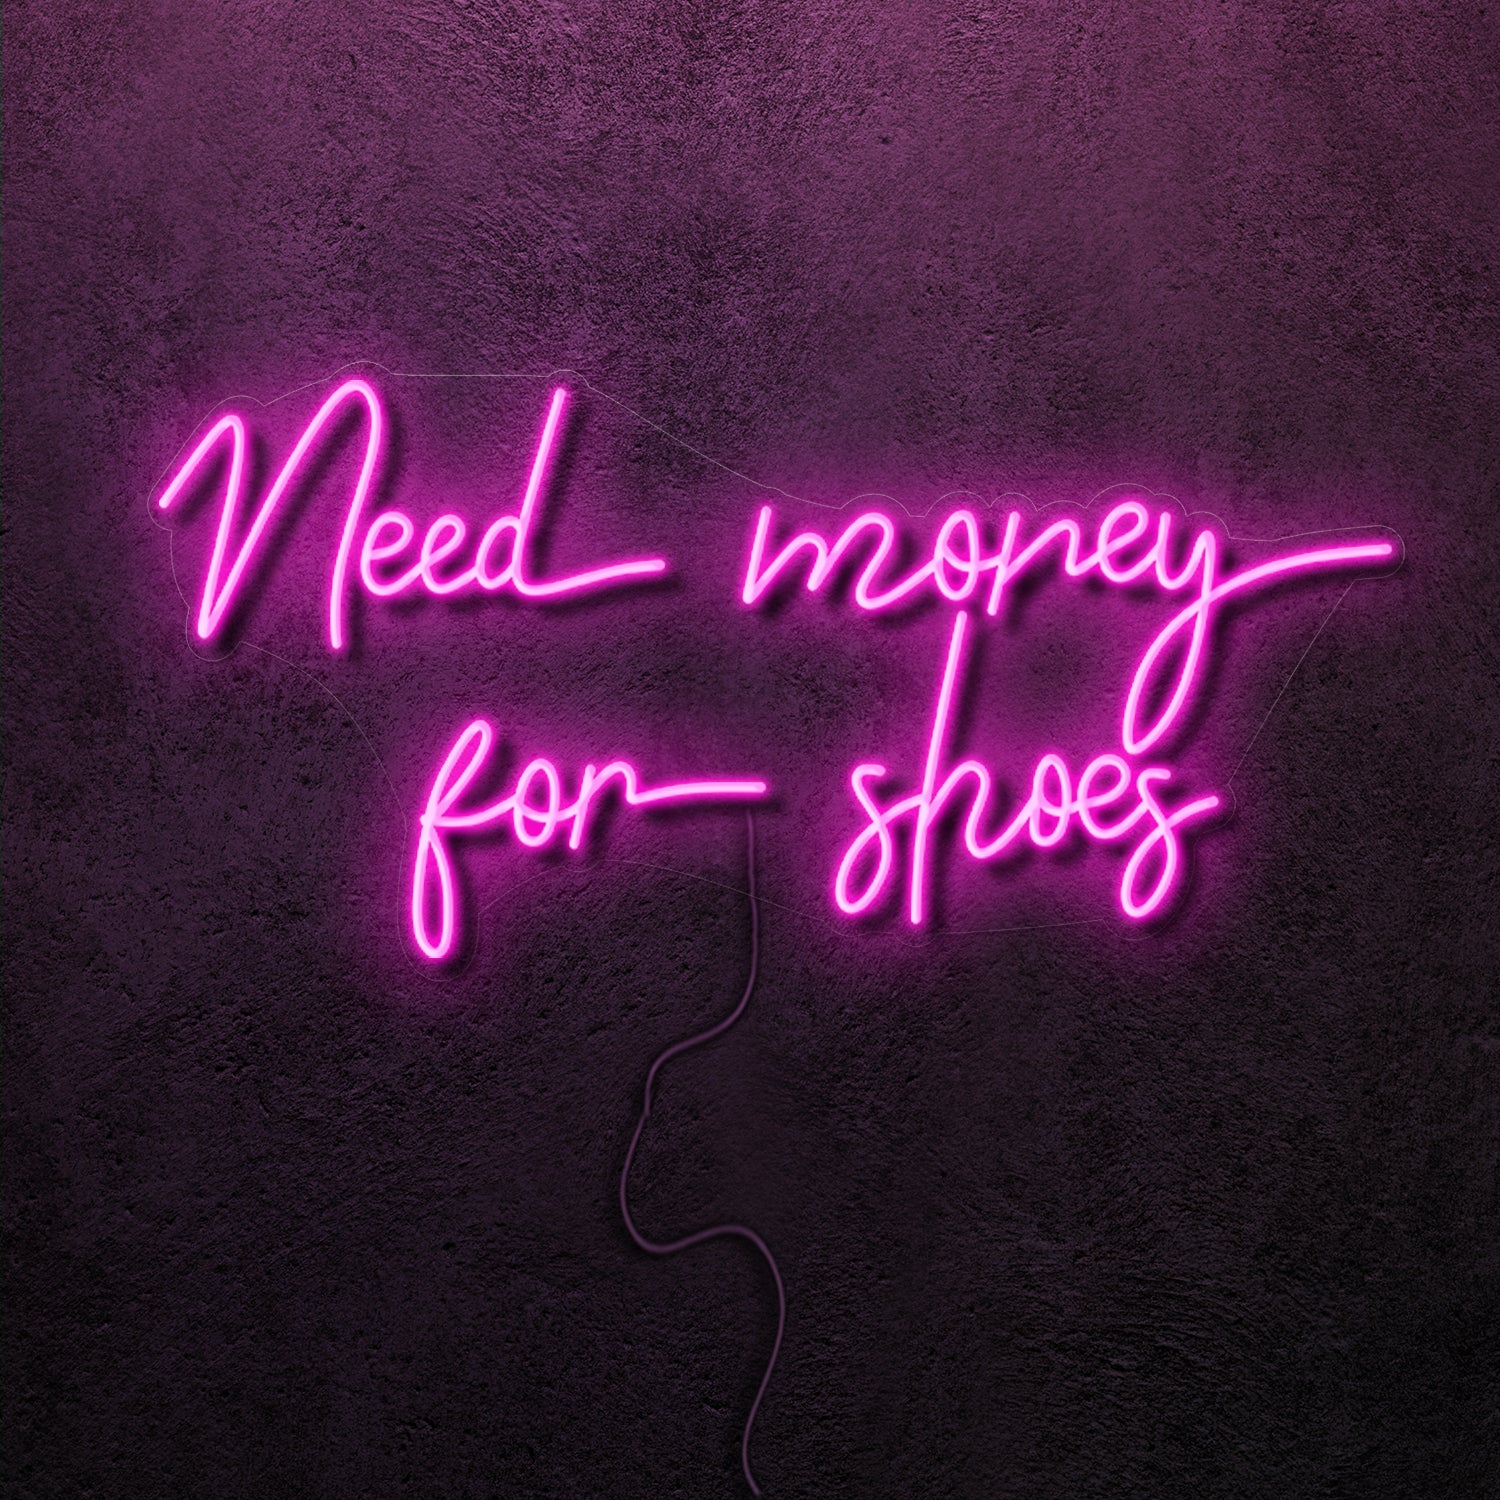 Need money for shoes - neoon.eu